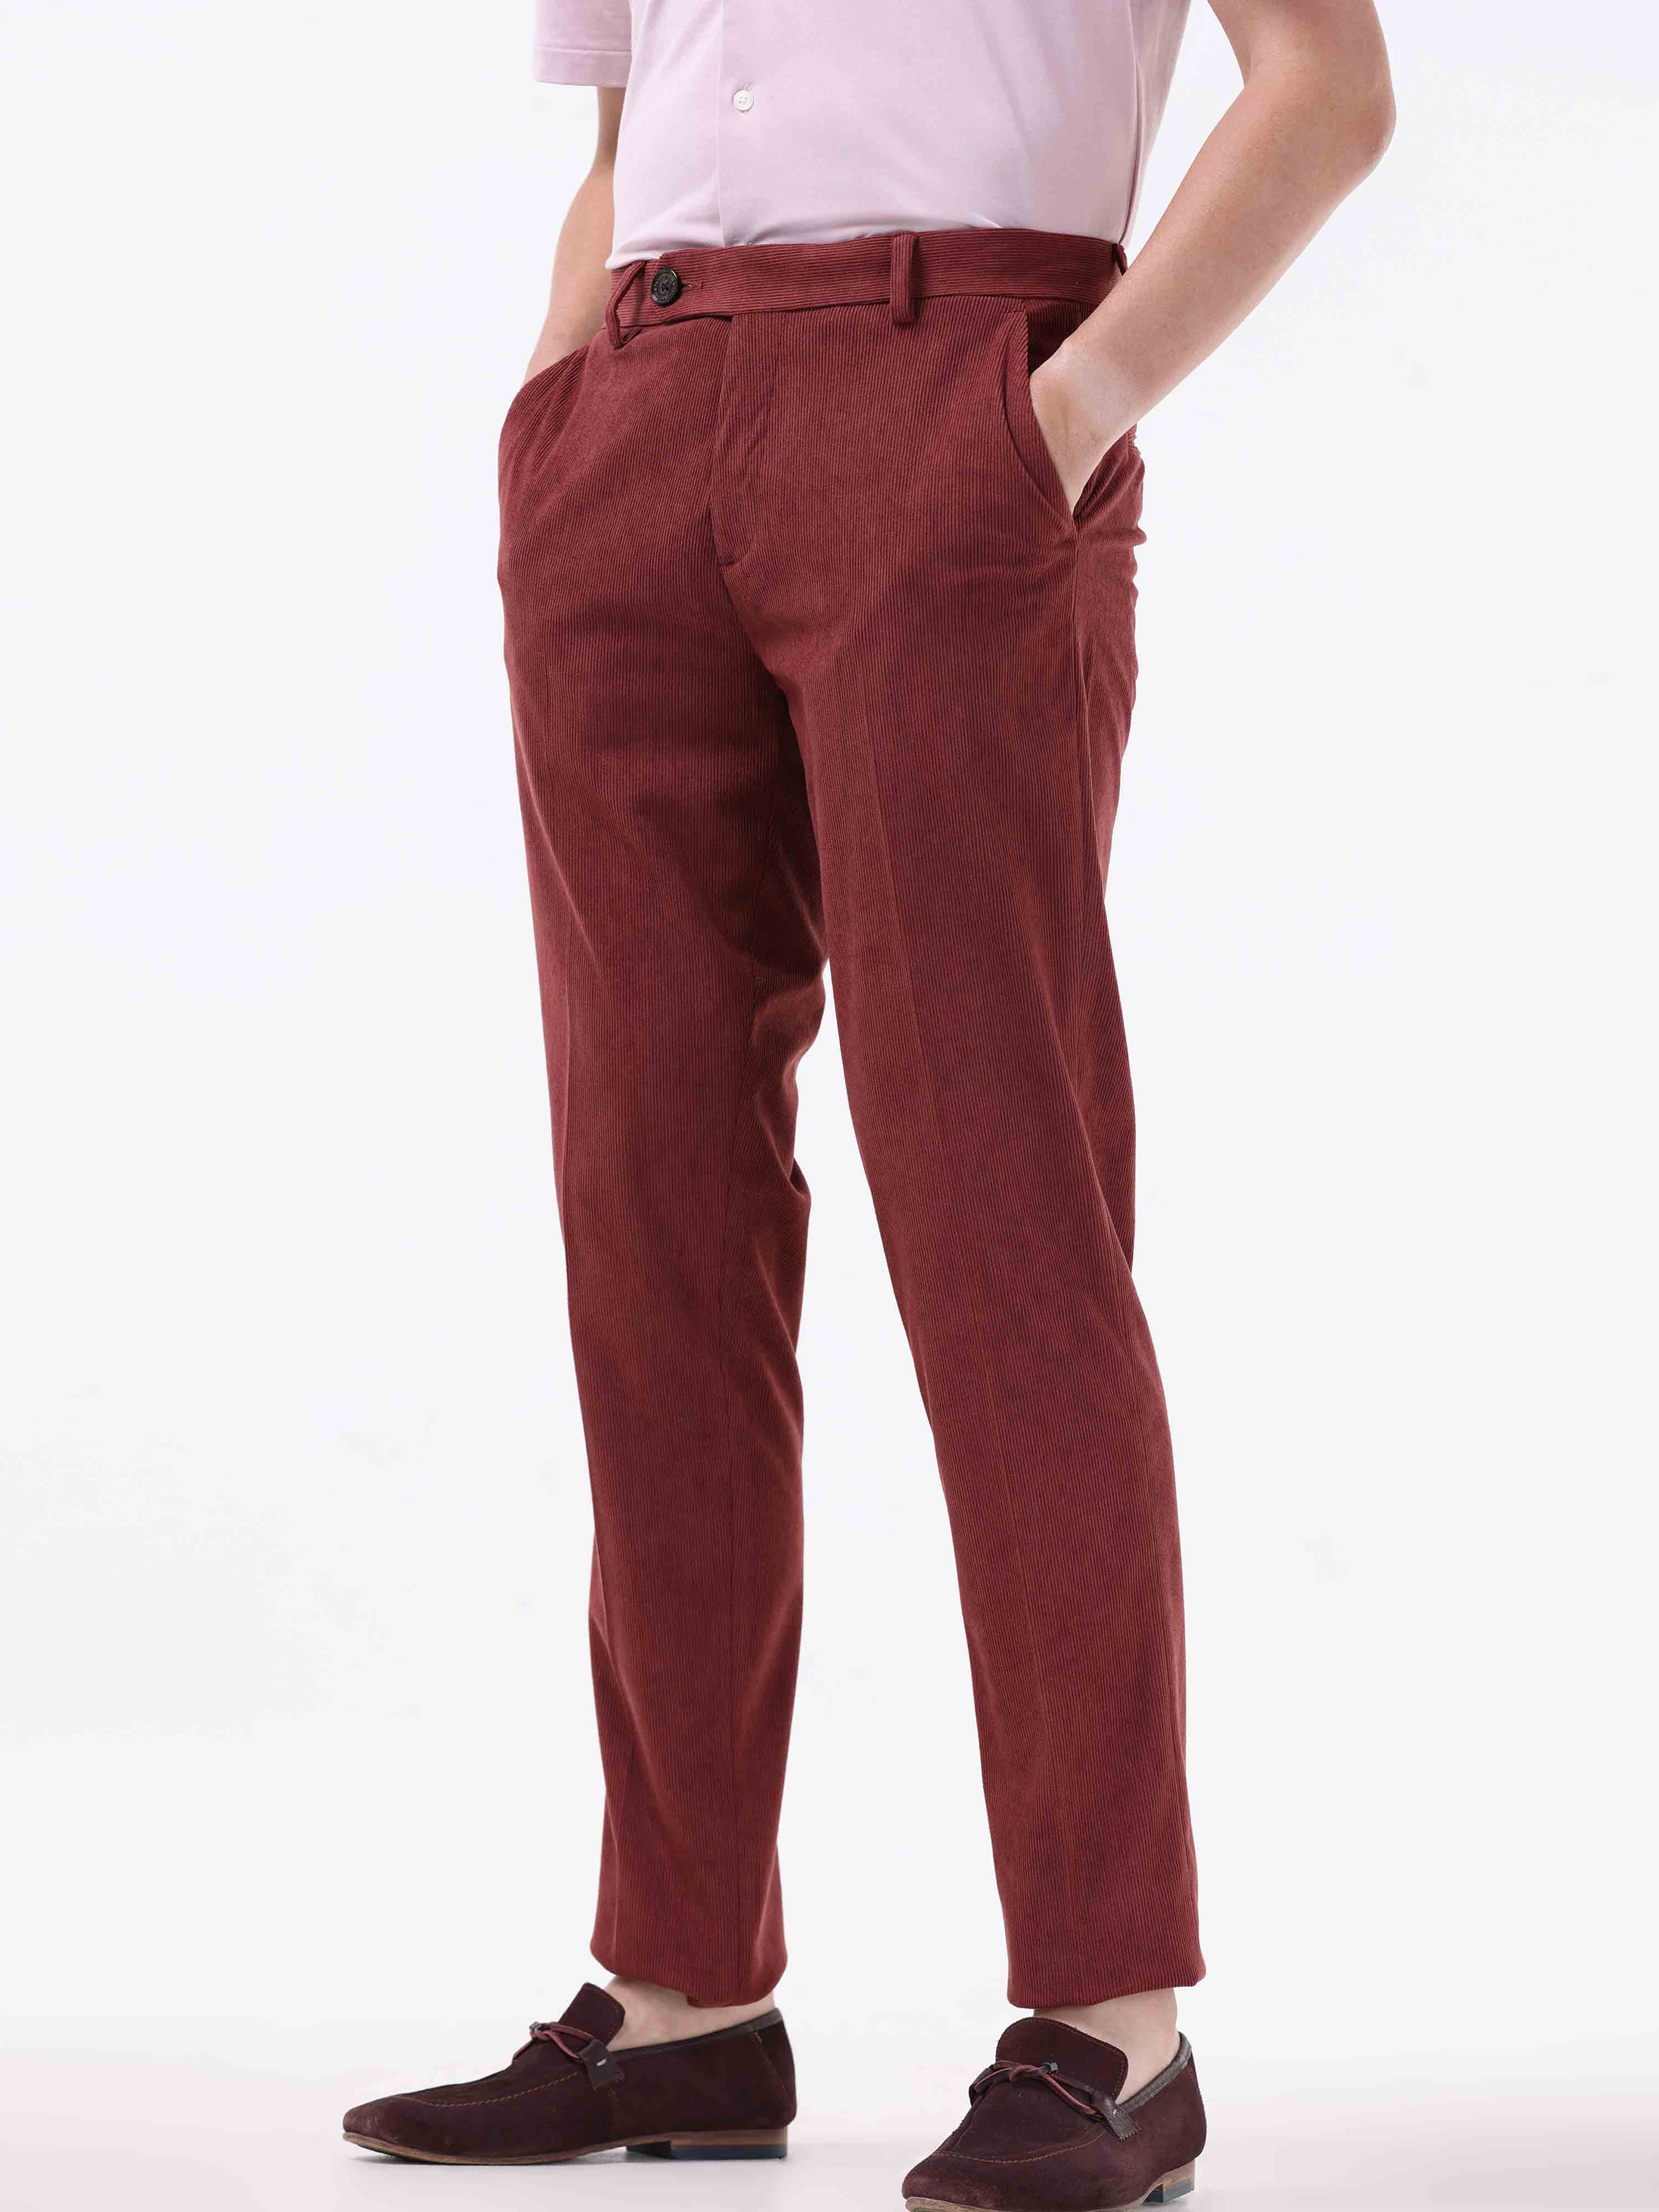 Corduroy Trousers - Buy Corduroy Trousers online in India